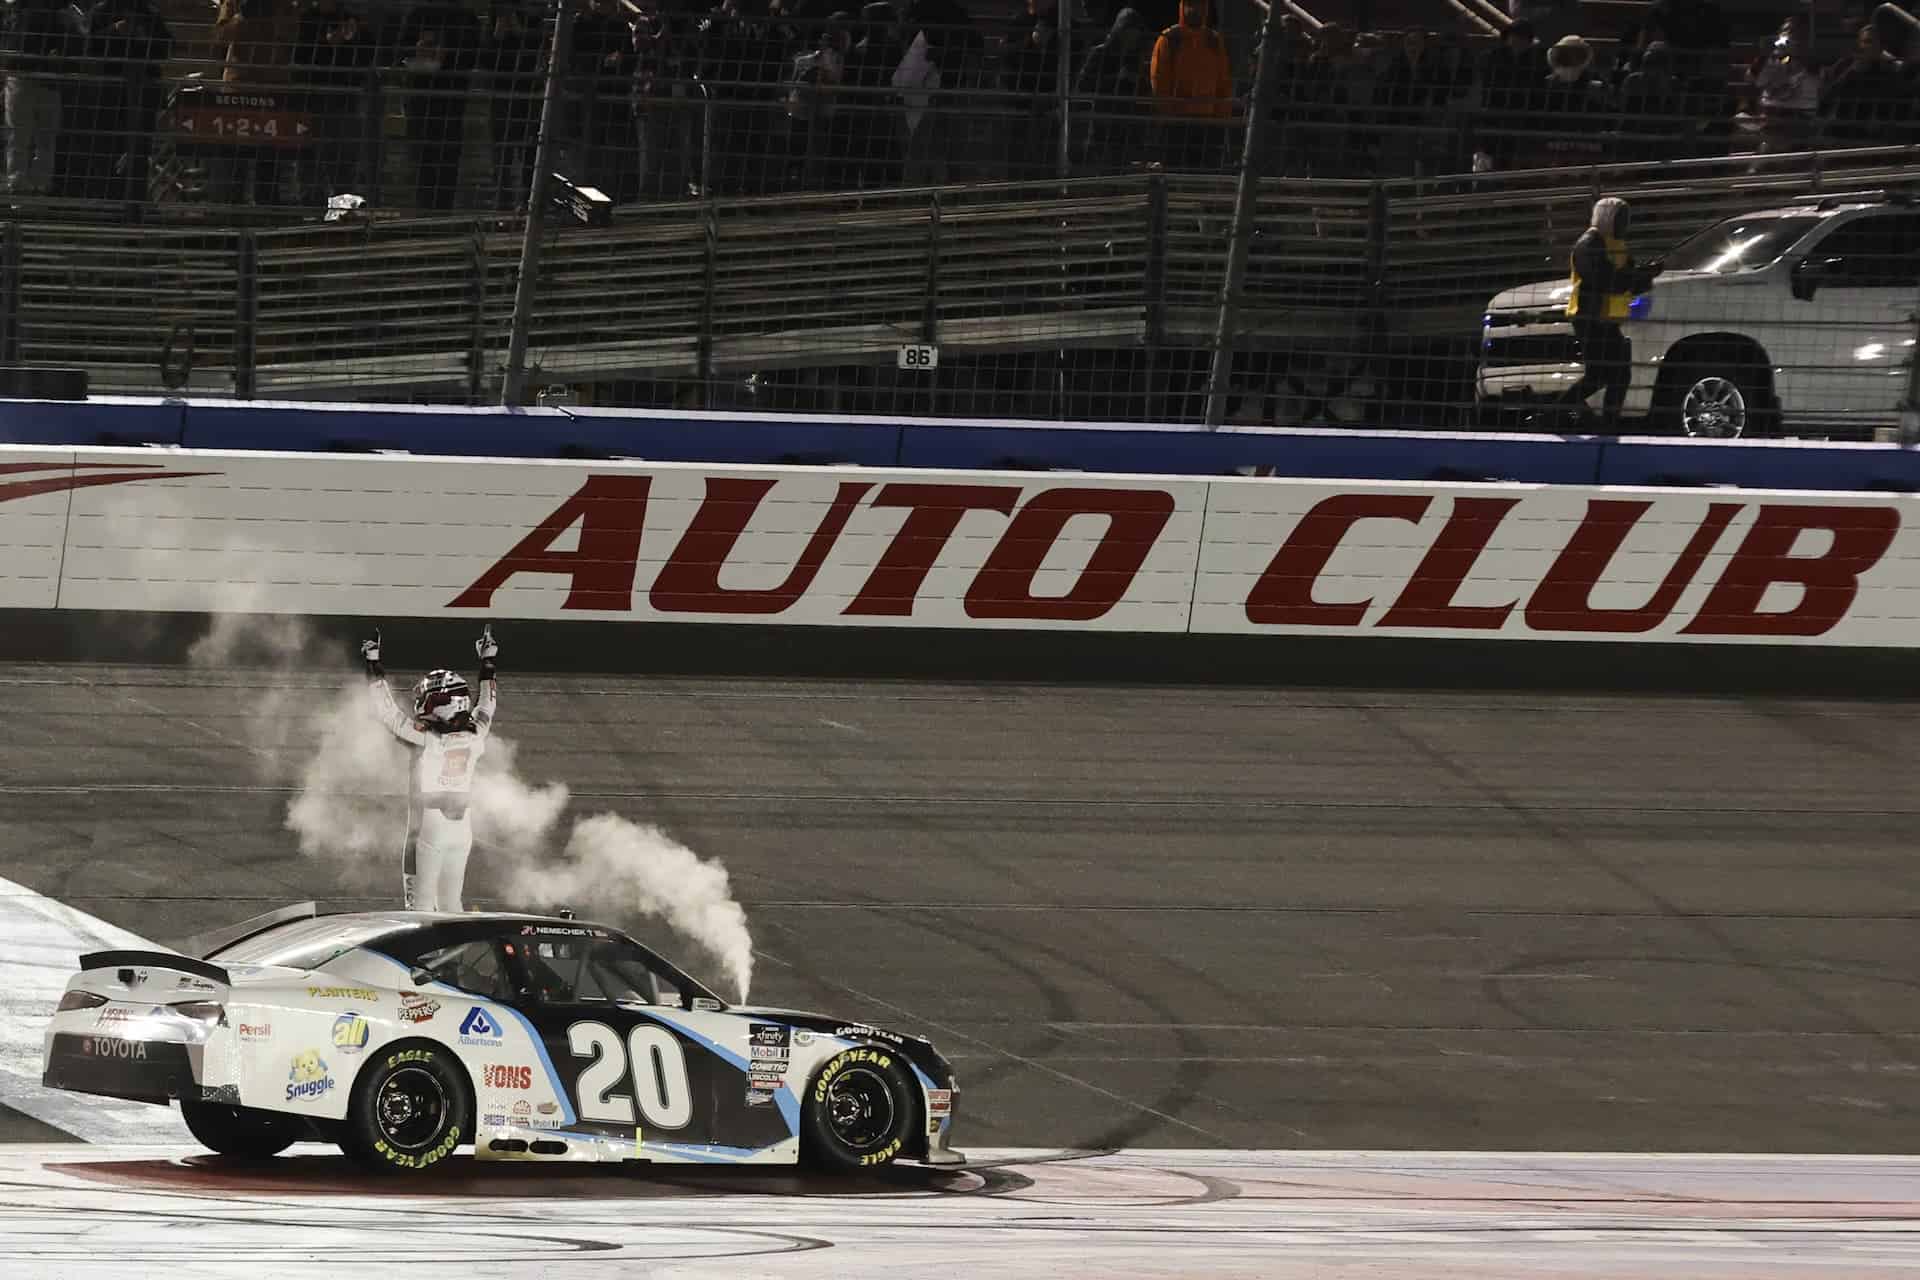 John Hunter Nemechek wins the last race at Auto Club Speedway in the Production Alliance Group 300. Photo by Nigel Kinrade Photography.